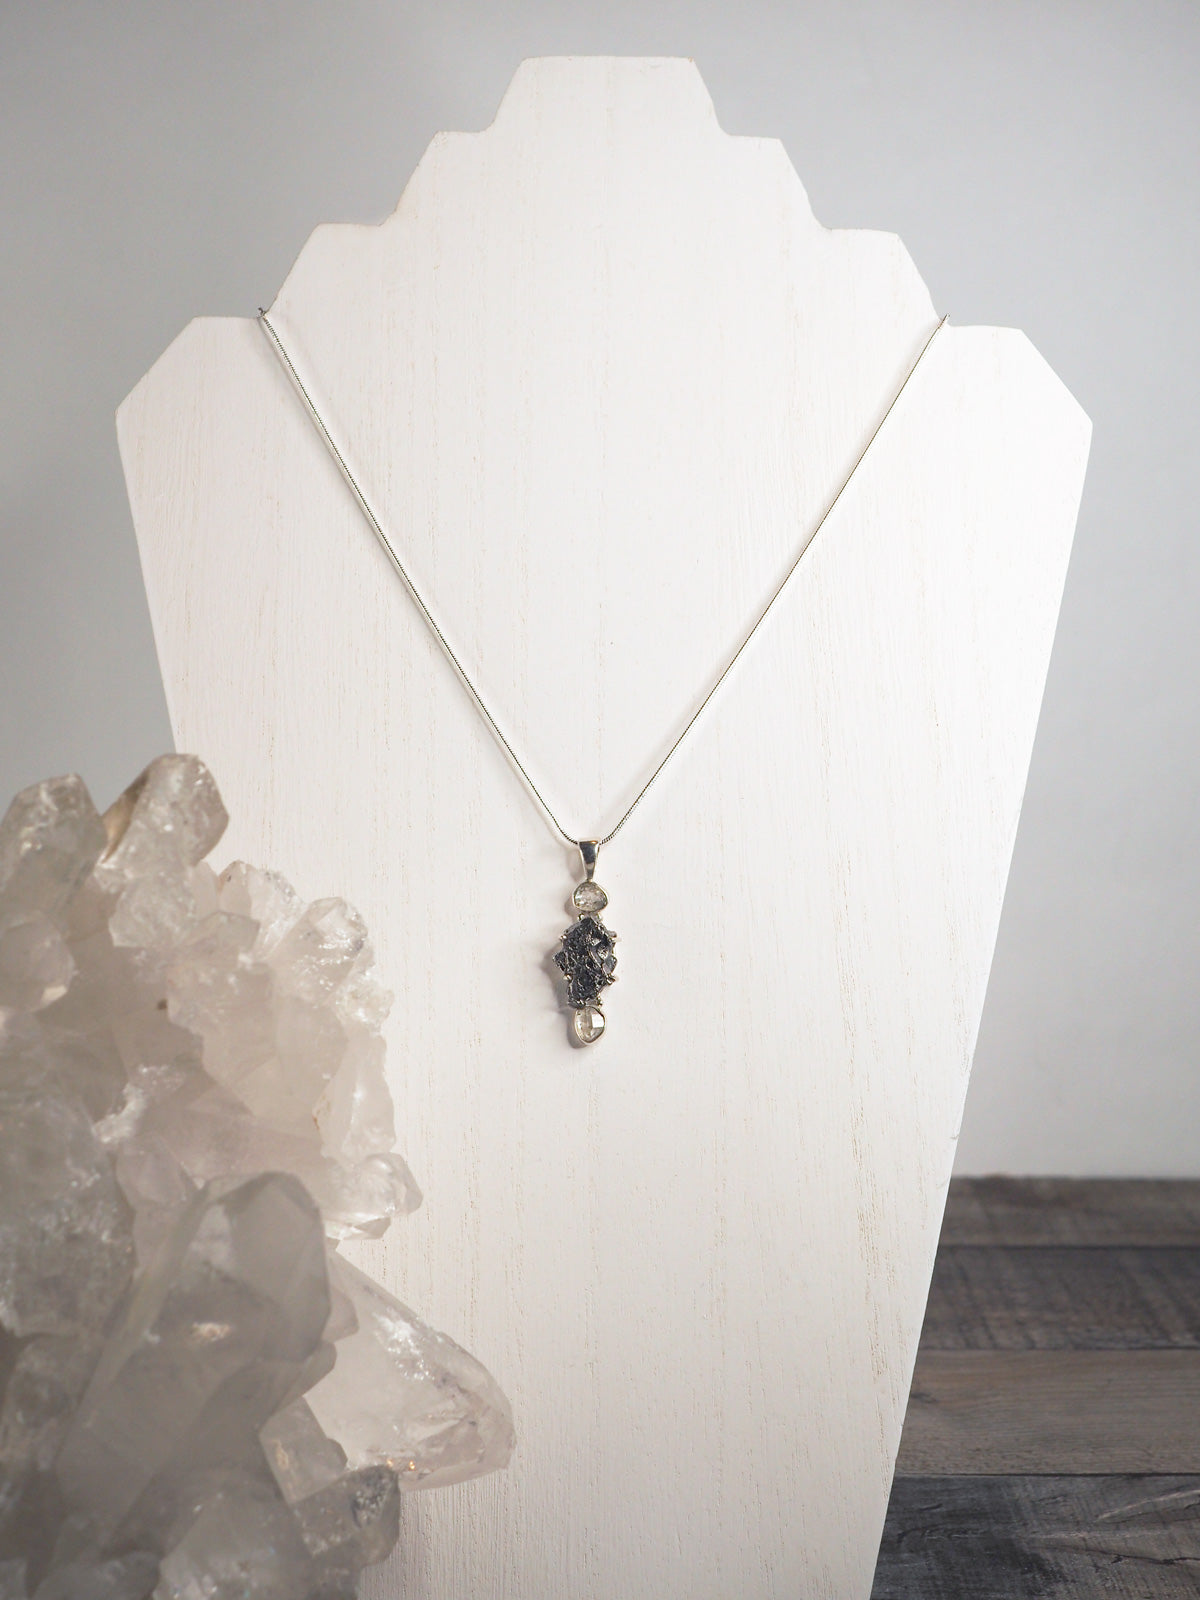 Campo del Cielo Meteorite and Herkimer Diamond Sterling Silver Pendant Necklace - Shown hanging